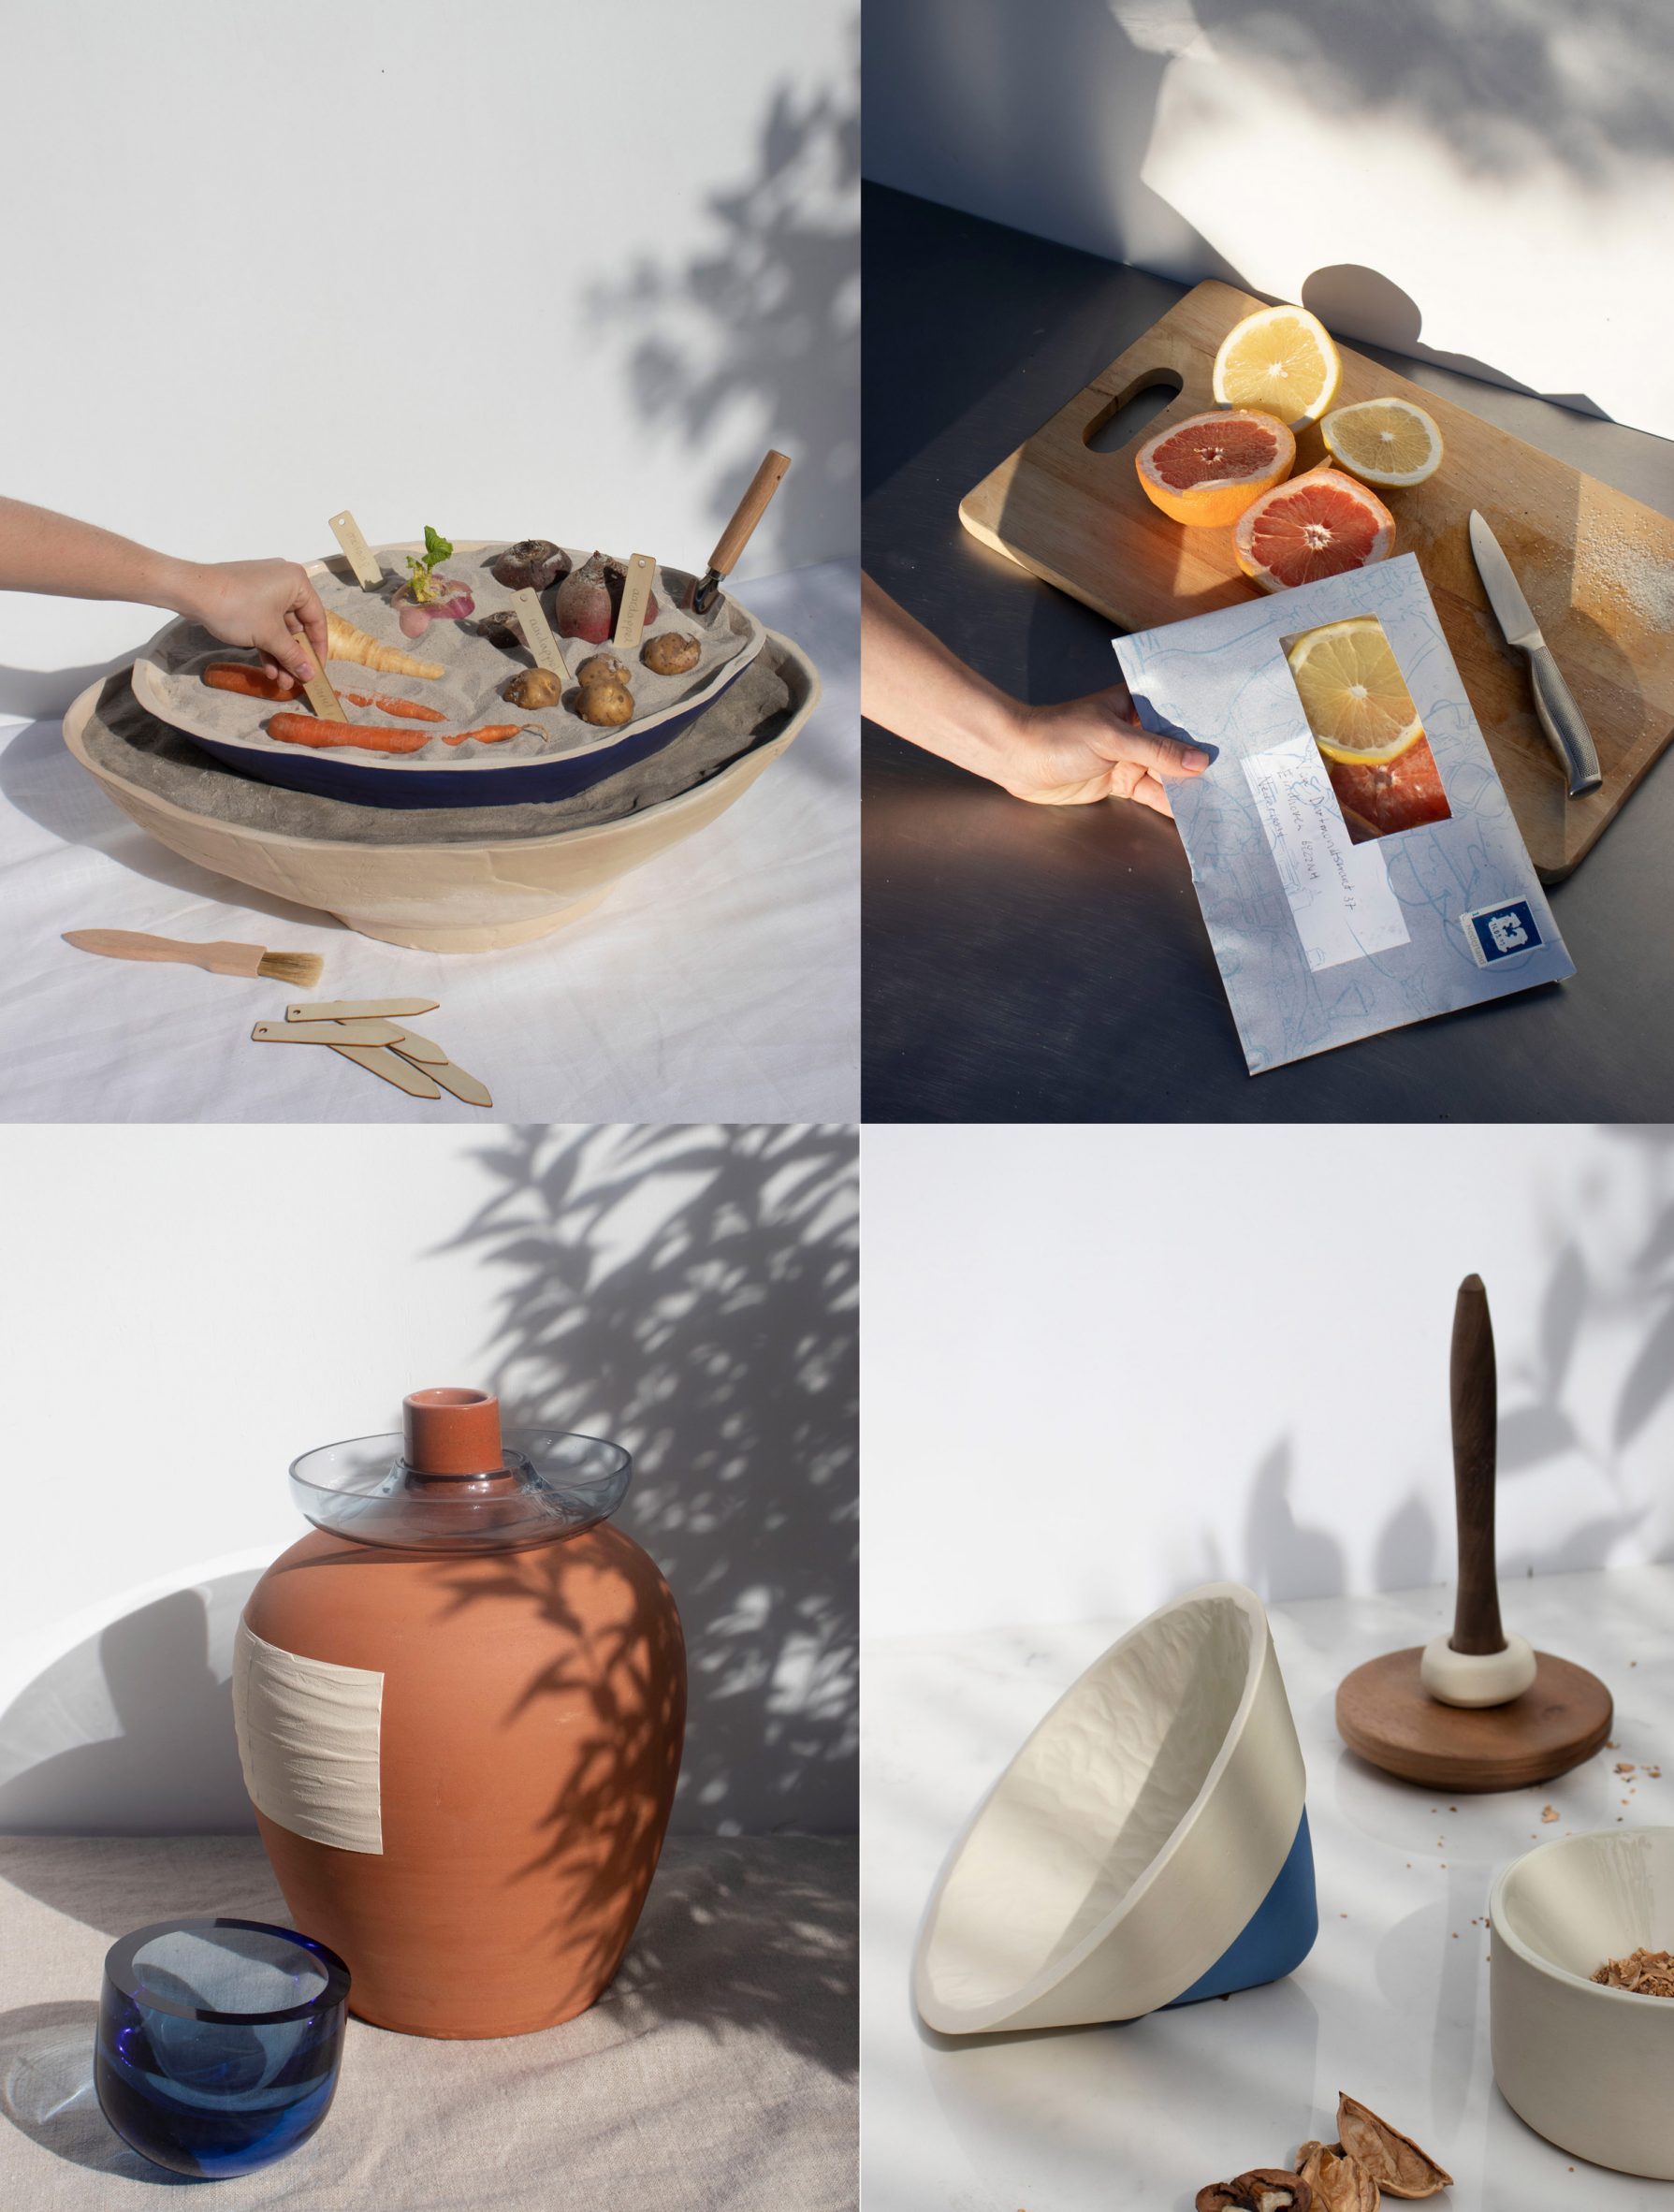 Four images of kitchen products, including bowls, chopping boards and vases